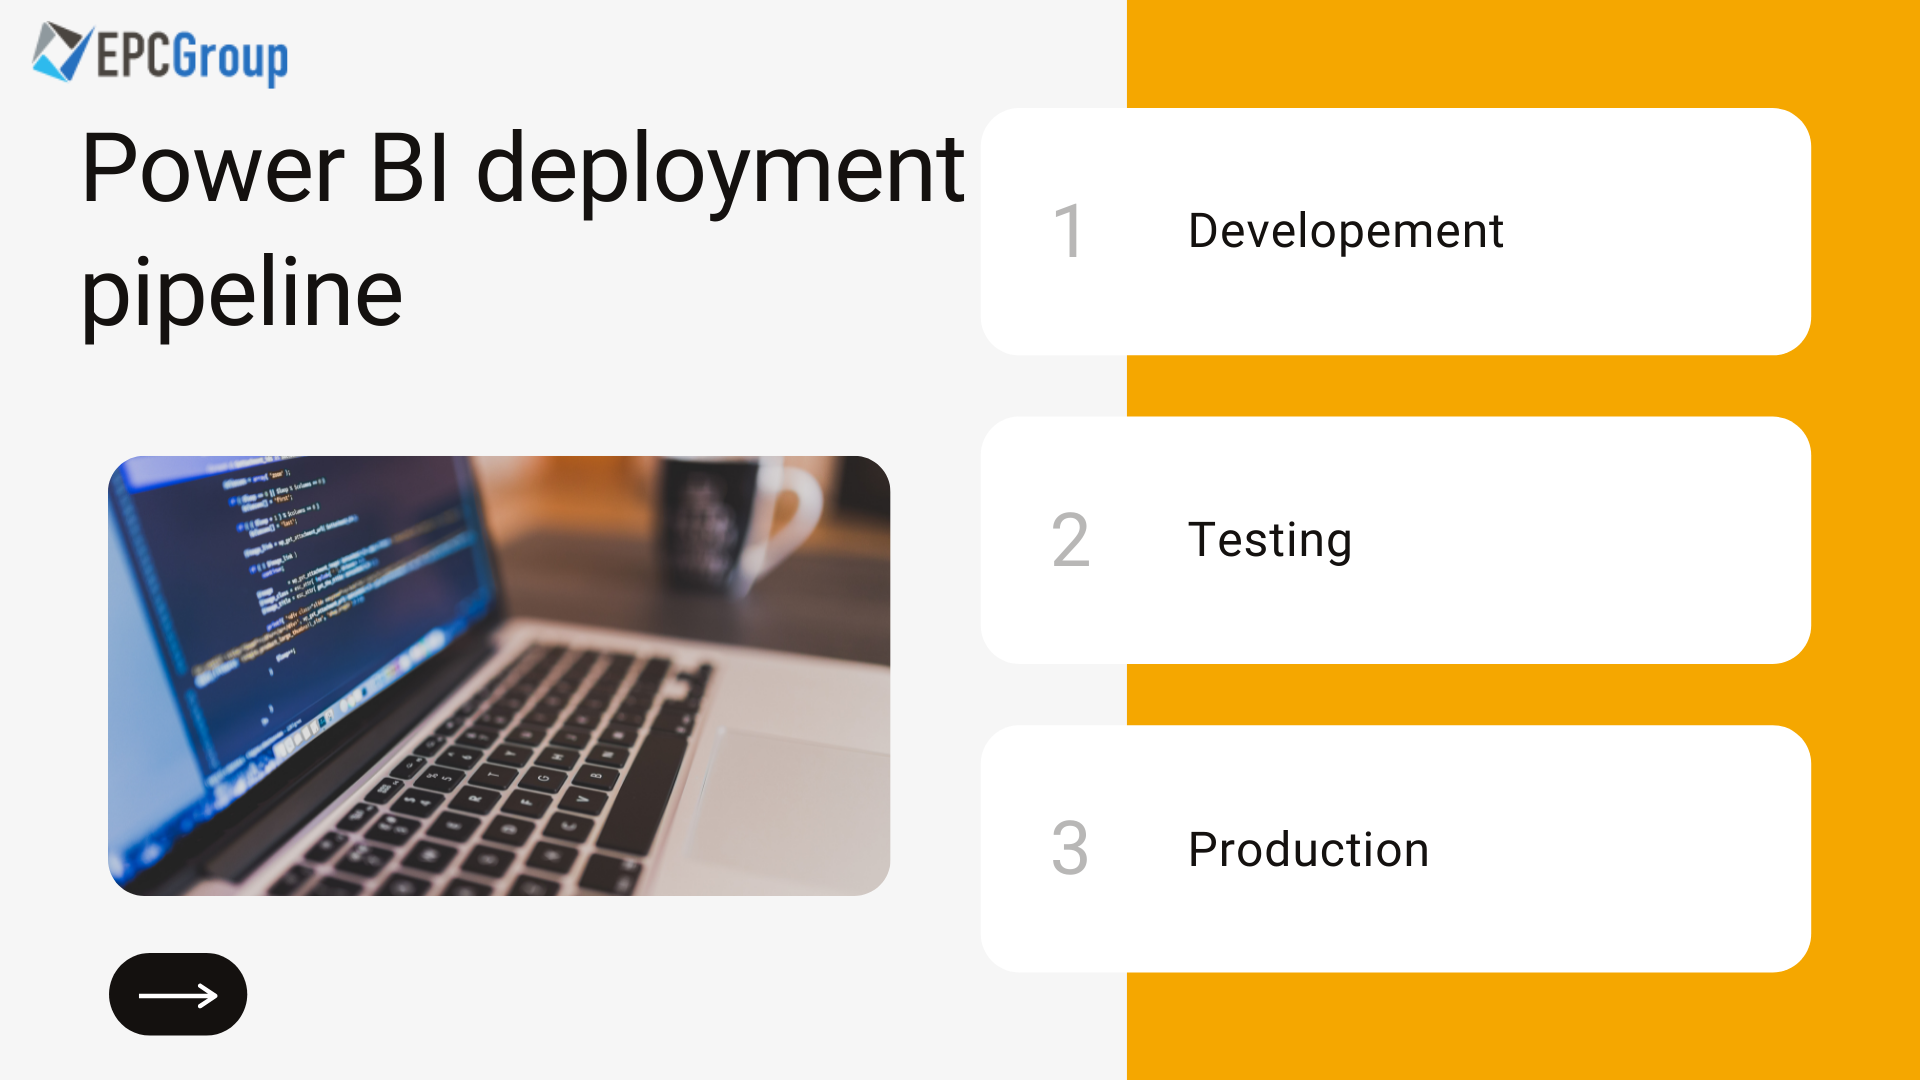 What Is The Power BI Deployment Pipeline?